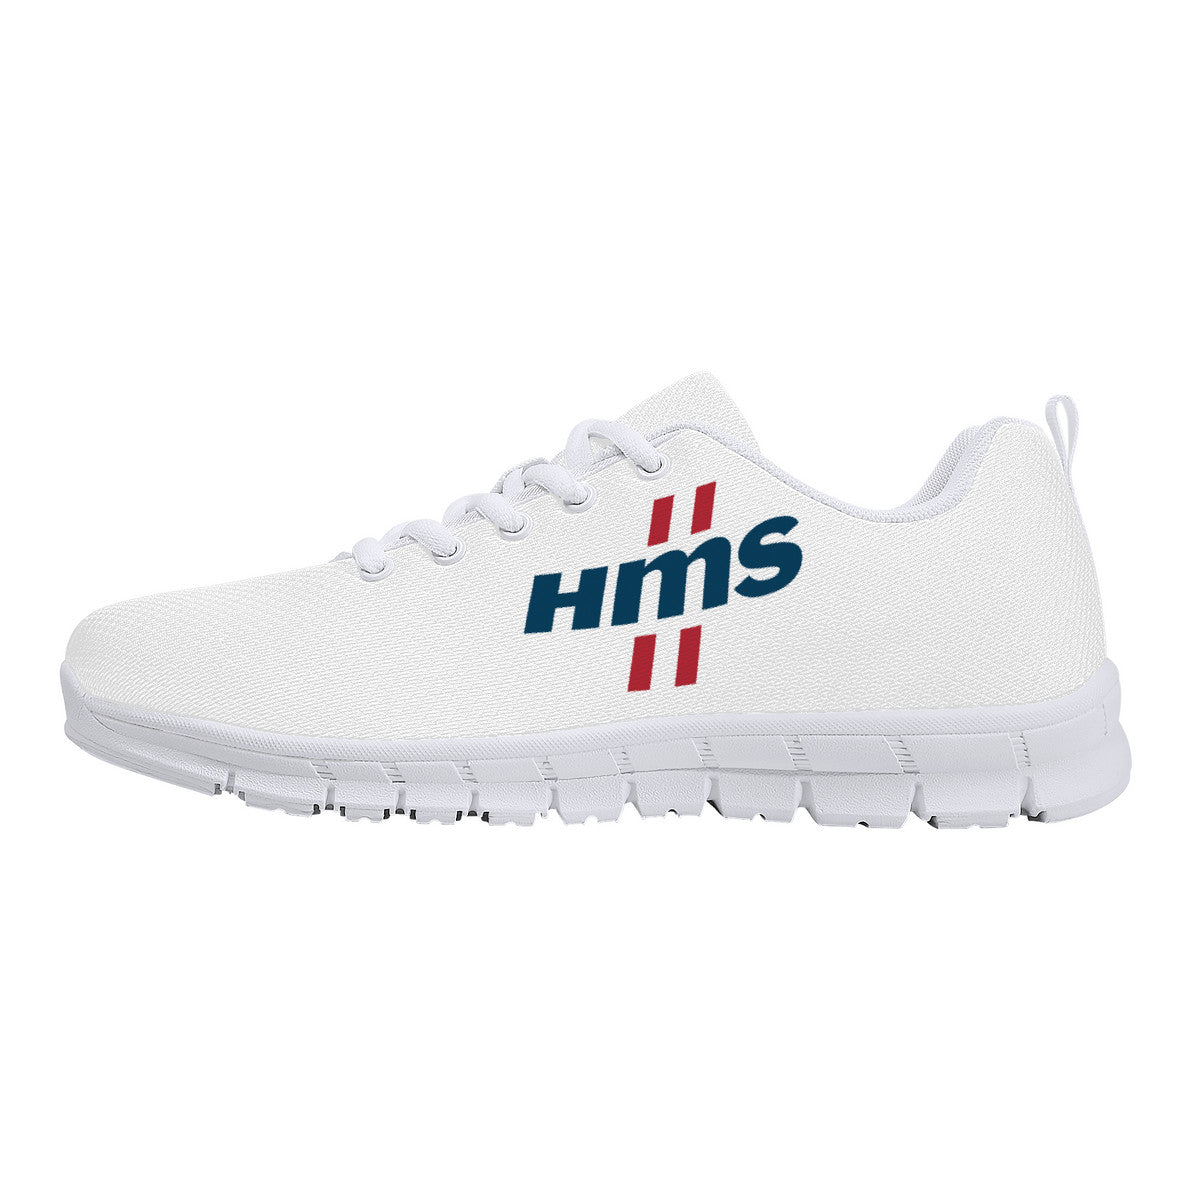 HMS | Branded Corporate Shoes